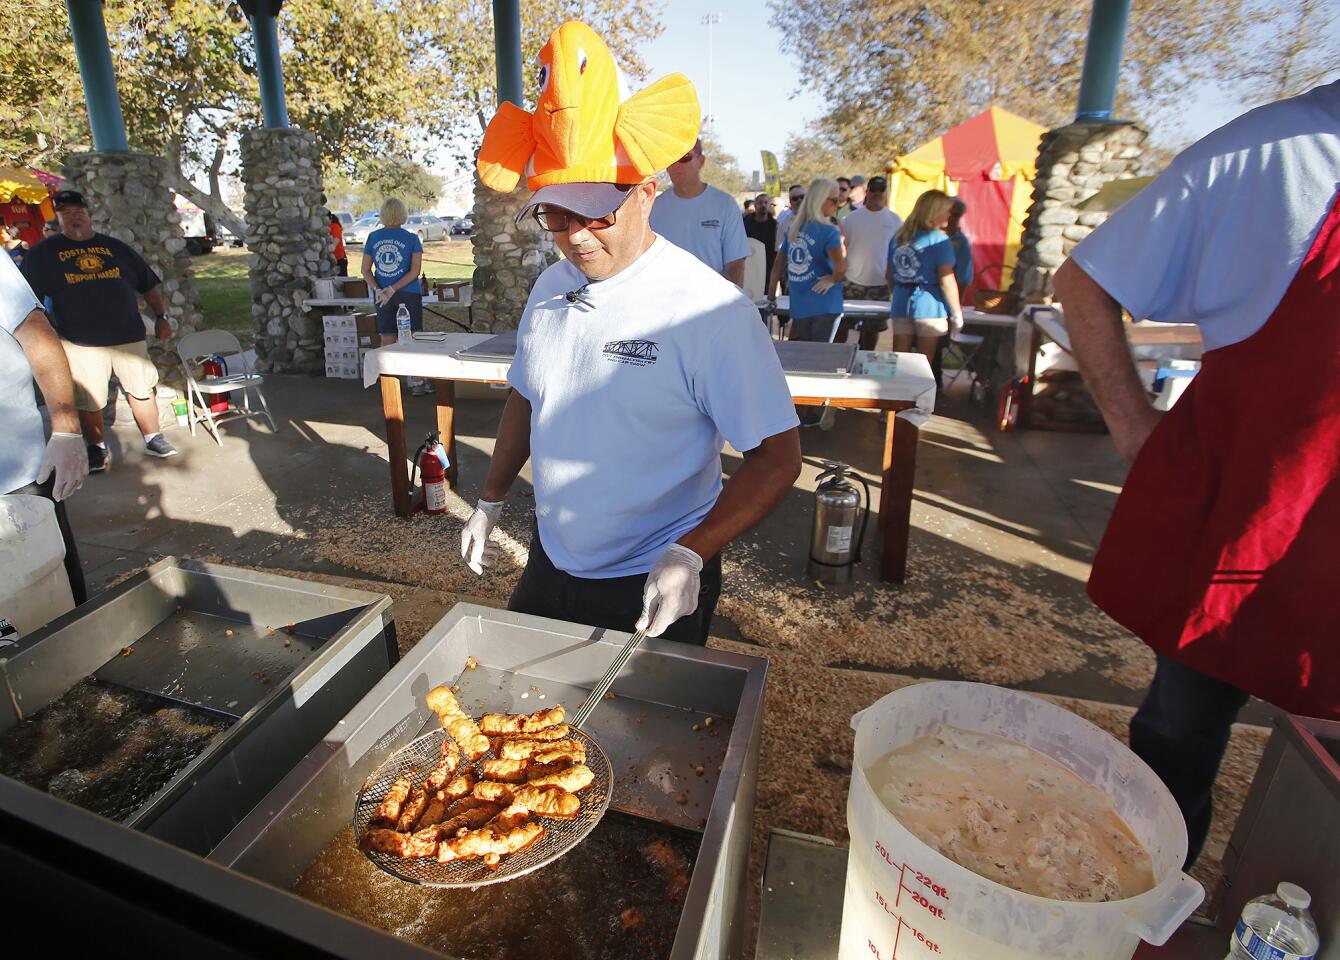 Raul Jara cooks fresh Icelandic cod for the 71st annual Costa Mesa-Newport Harbor Lions Club Fish Fry at Fairview Park in Costa Mesa on Friday, opening day of the three-day festival.